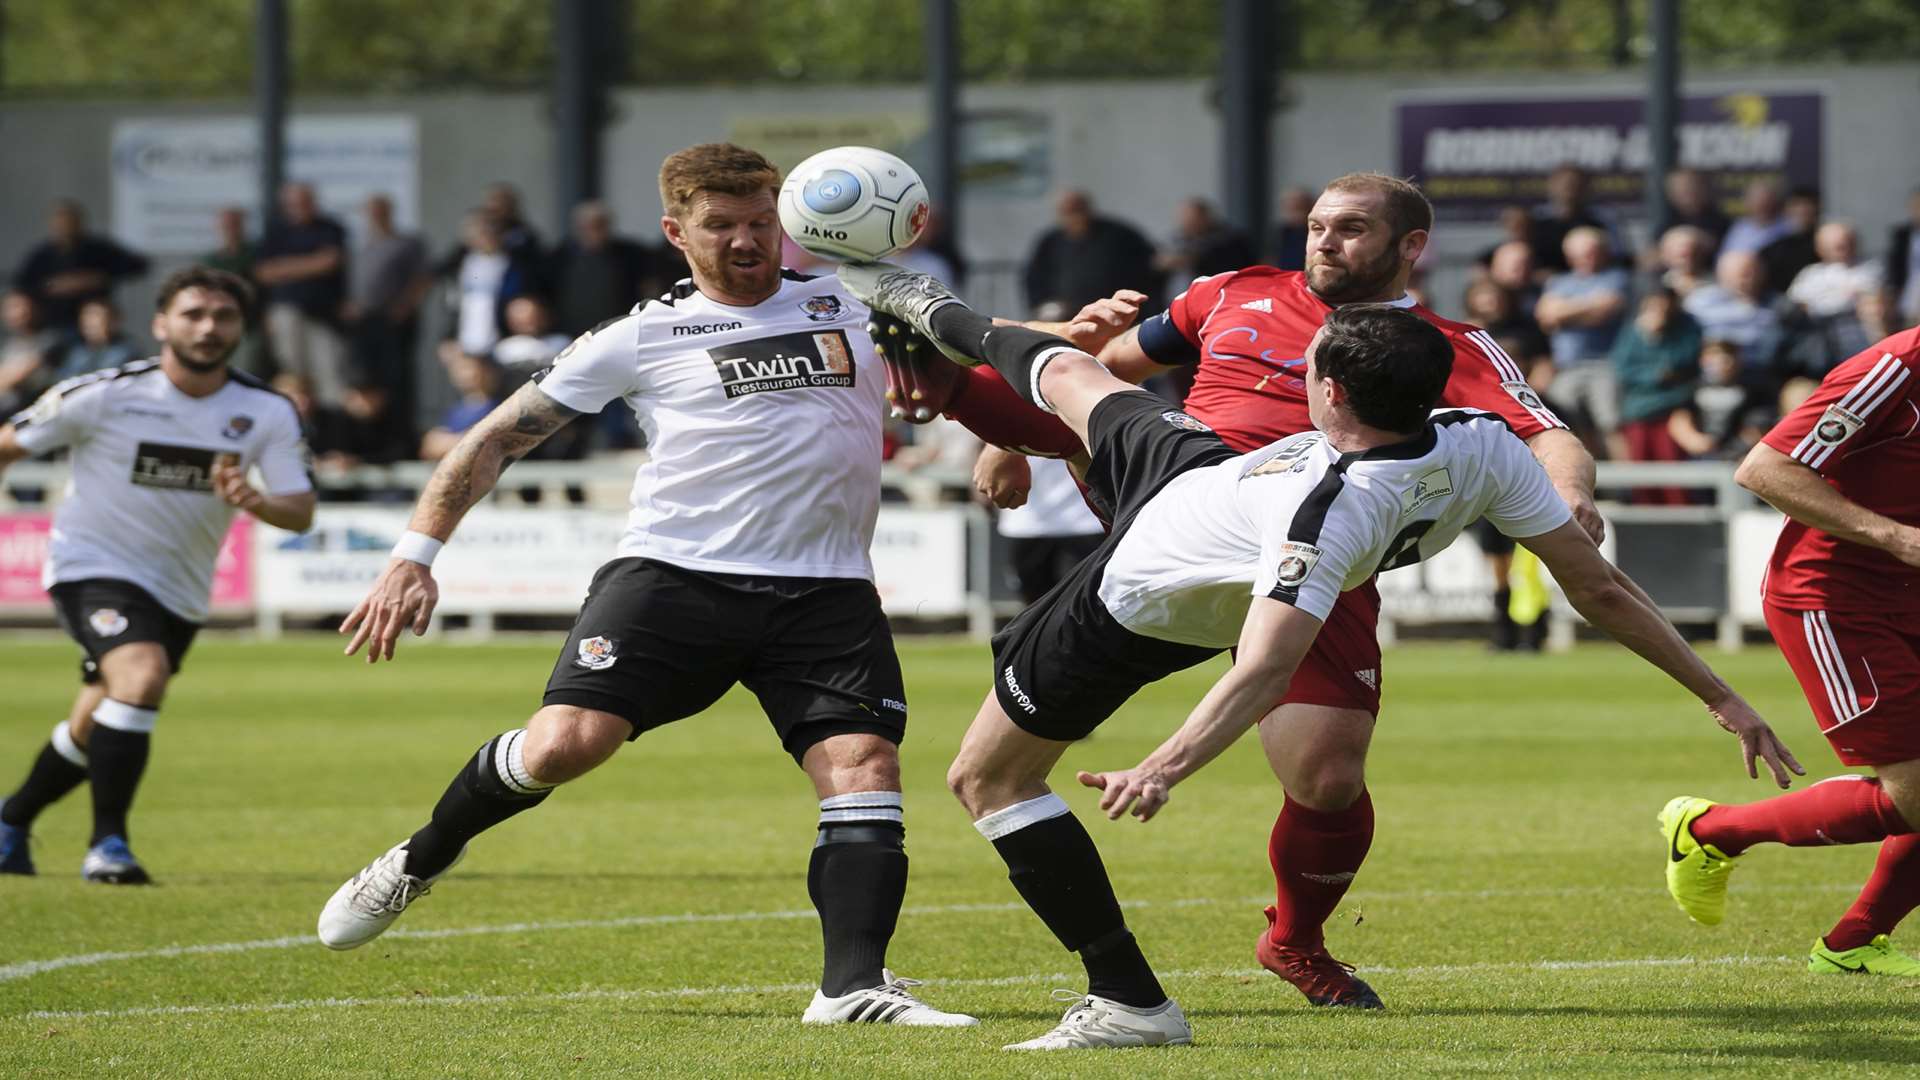 Danny Harris stretches for the ball with Elliot Bradbrook in close proximity Picture: Andy Payton